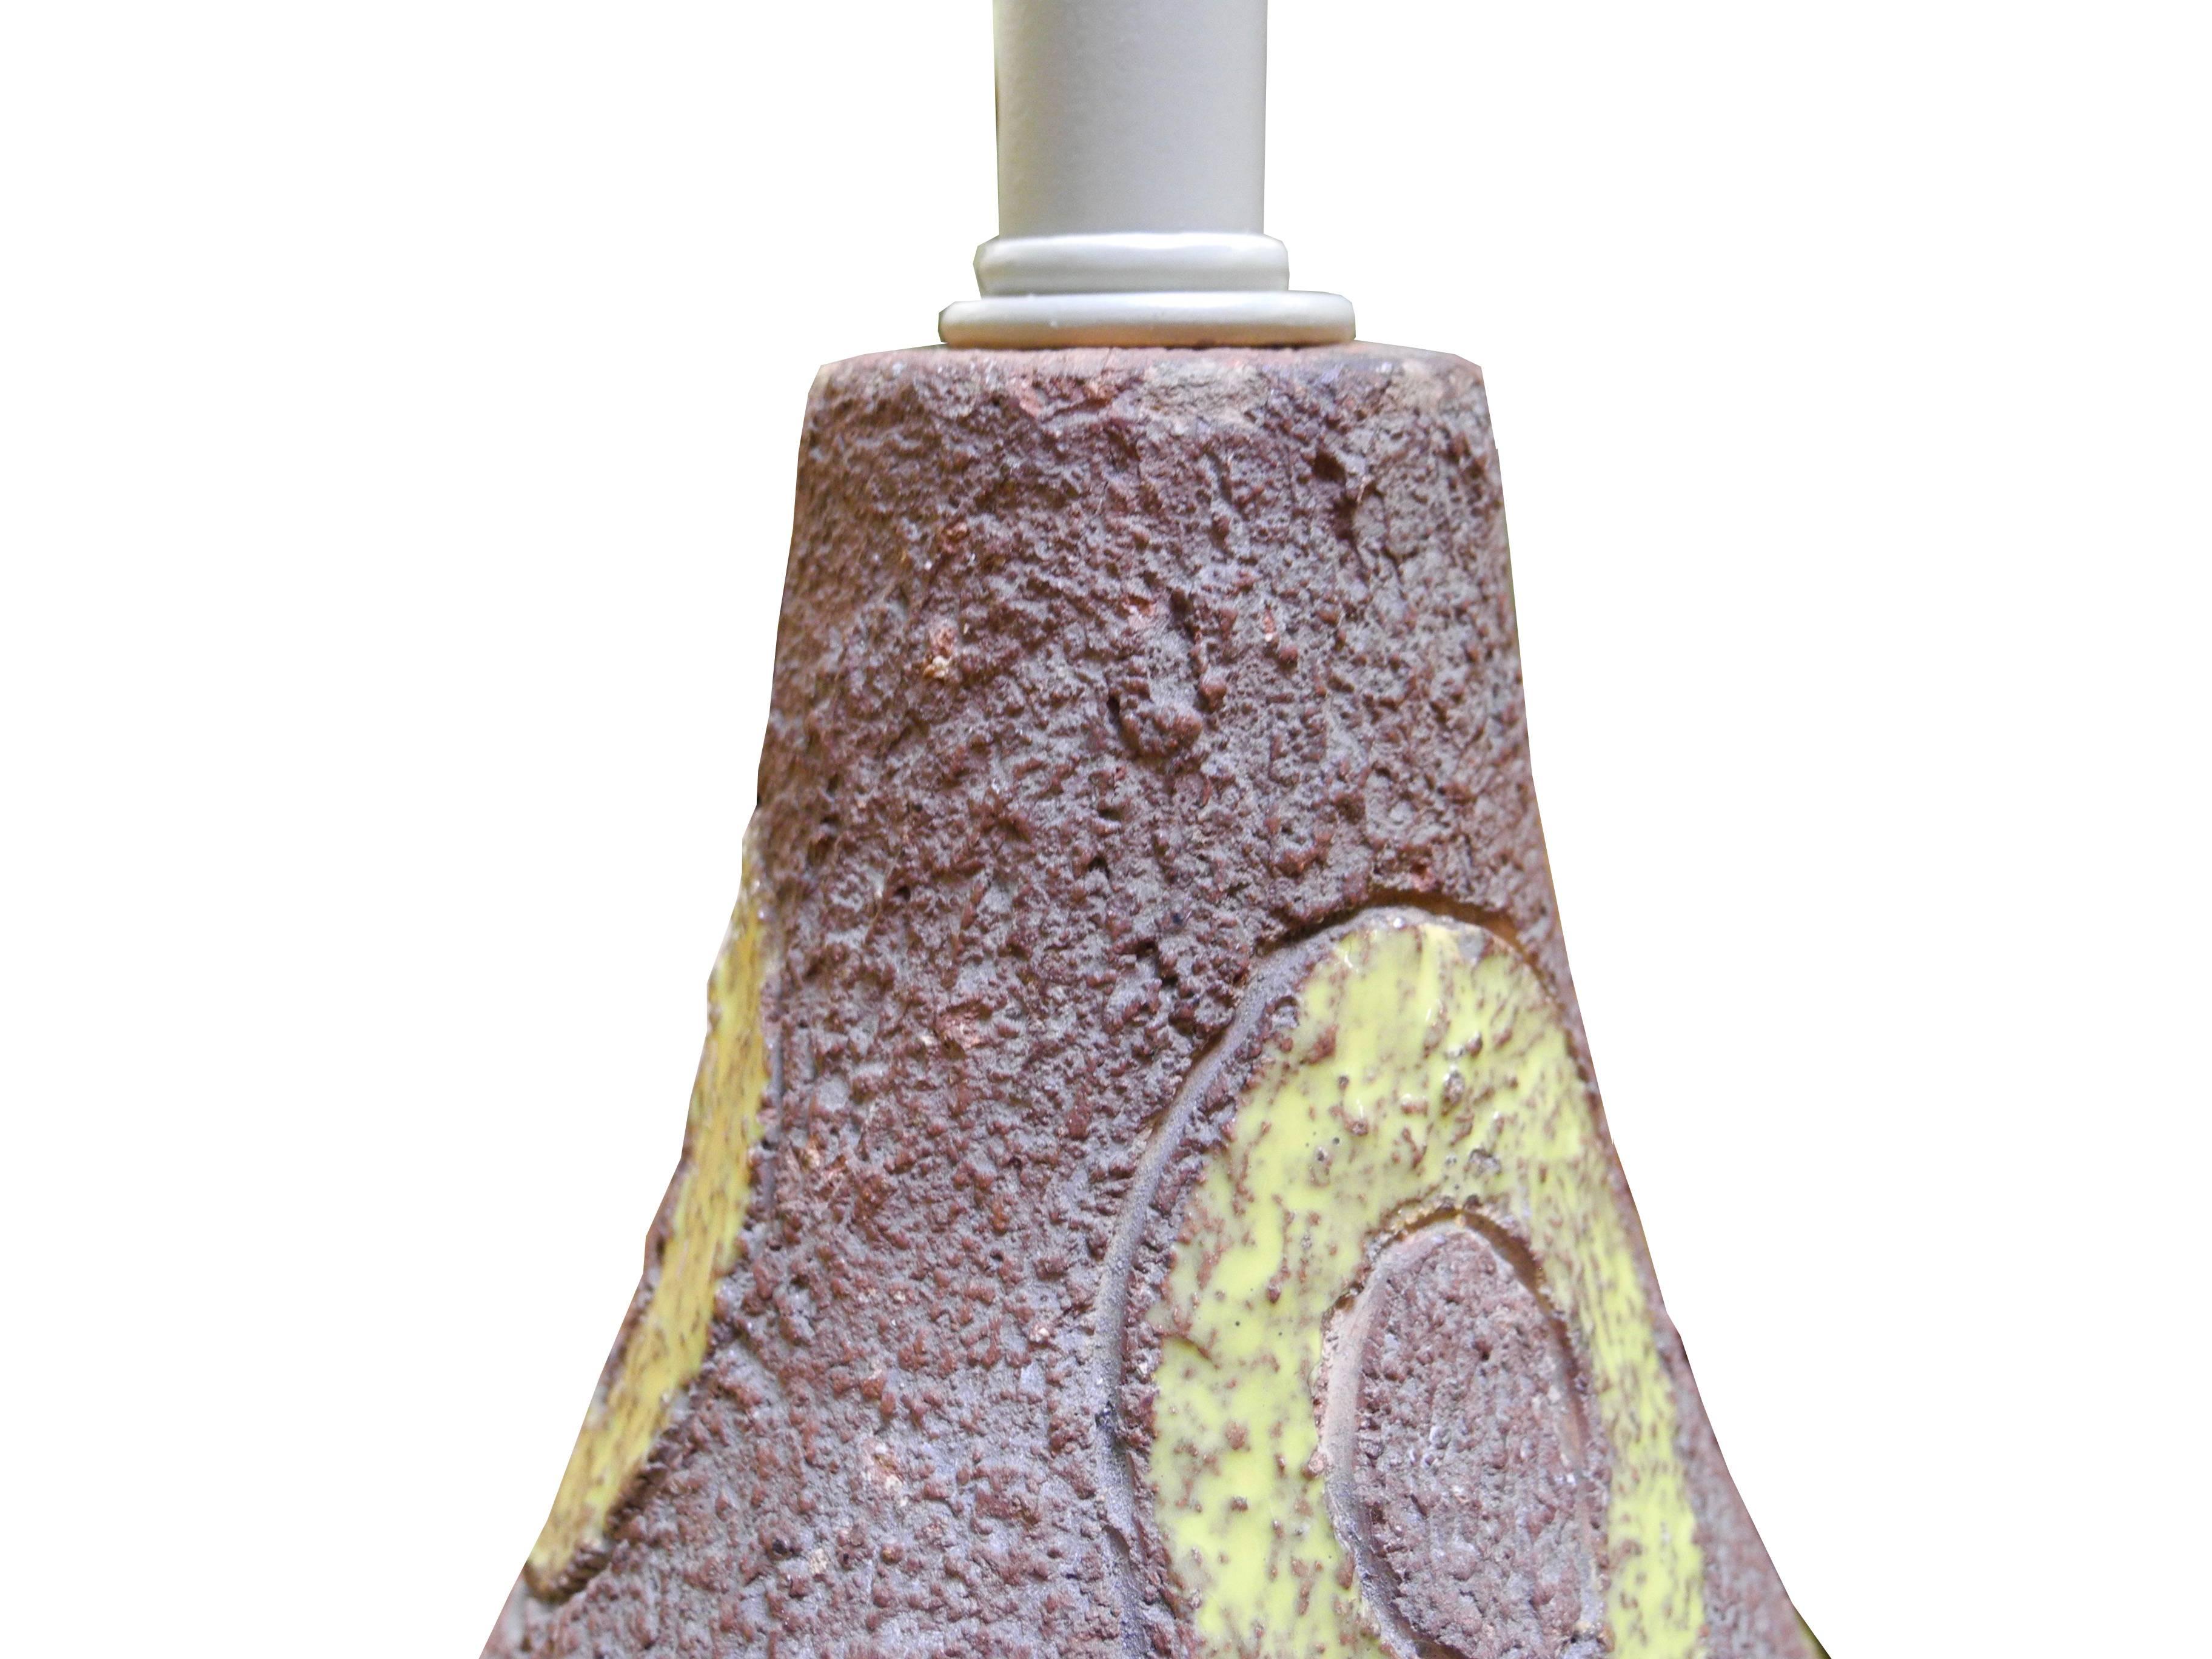 Mid-Century Modern Italian Textured Ceramic Lamp by Ugo Zaccagnini, 1950s For Sale 2